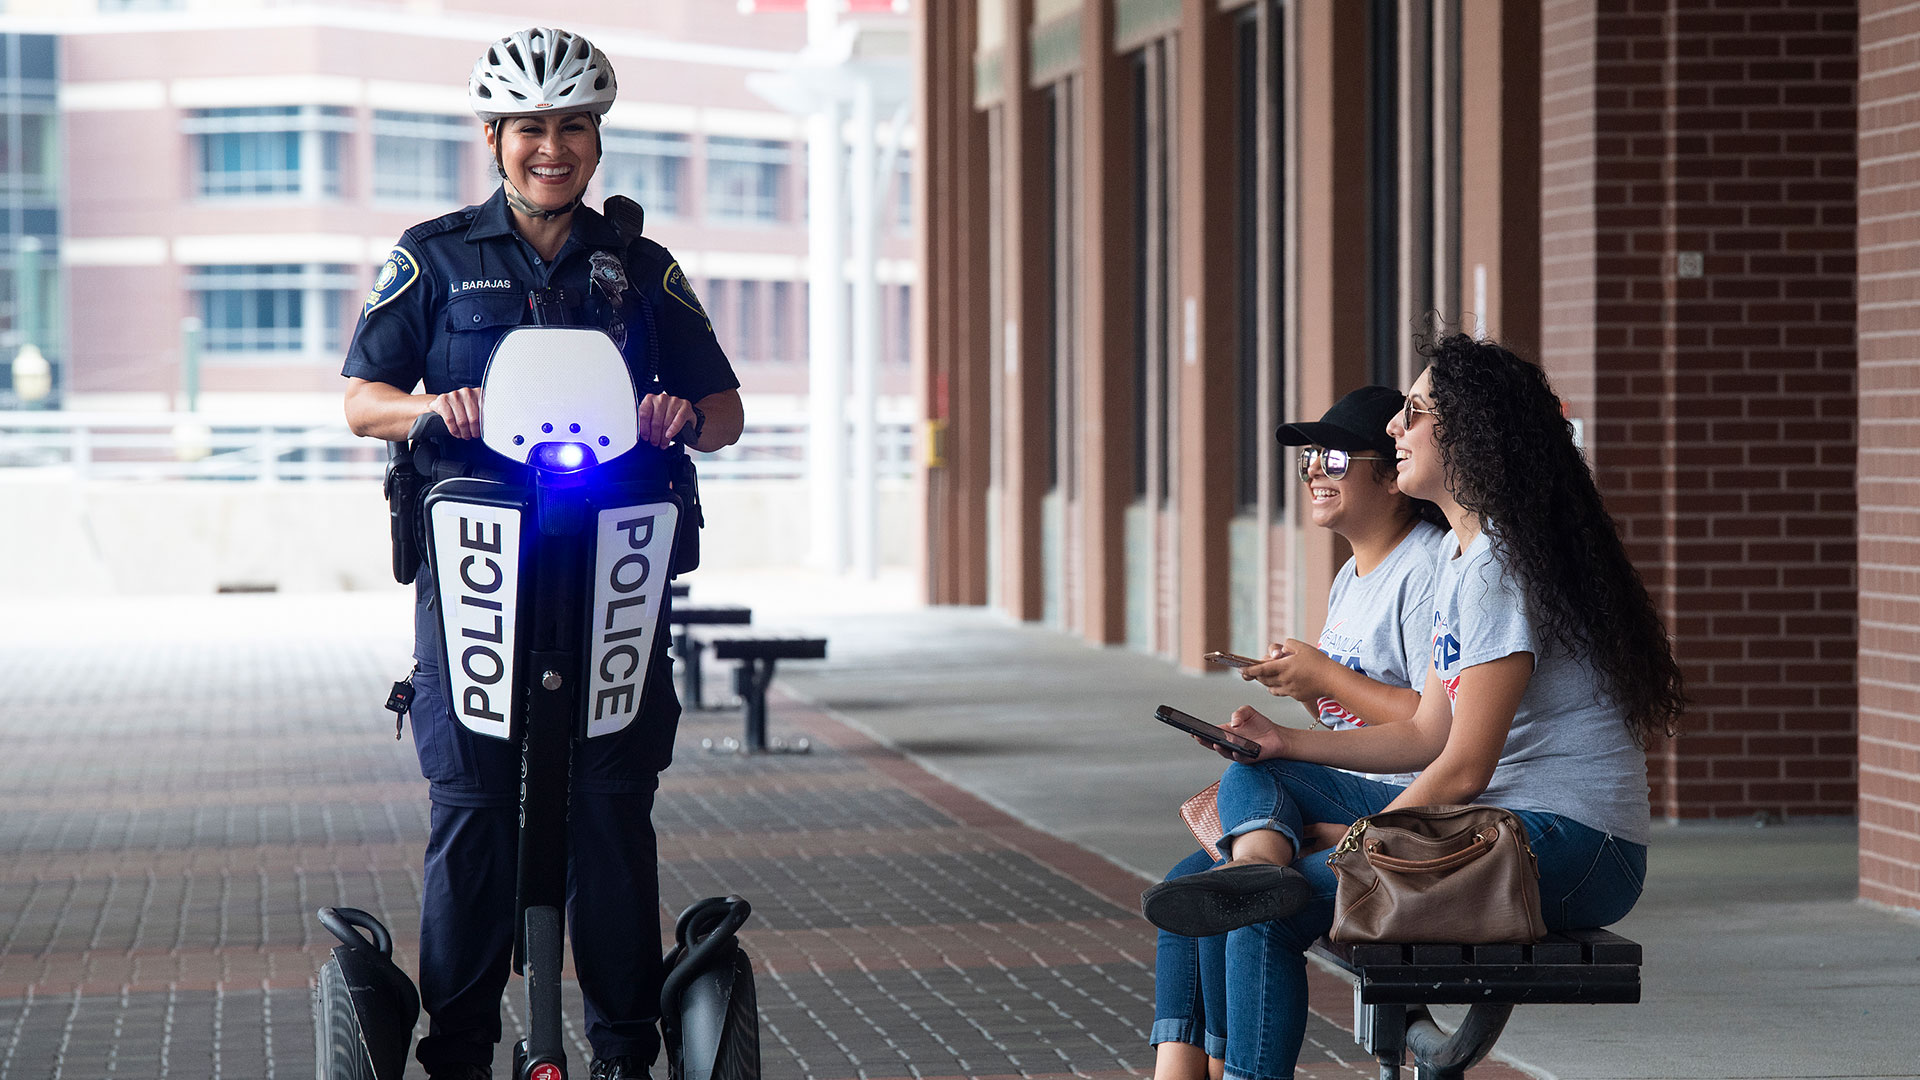 Police Officer on Segway with Students on Bench